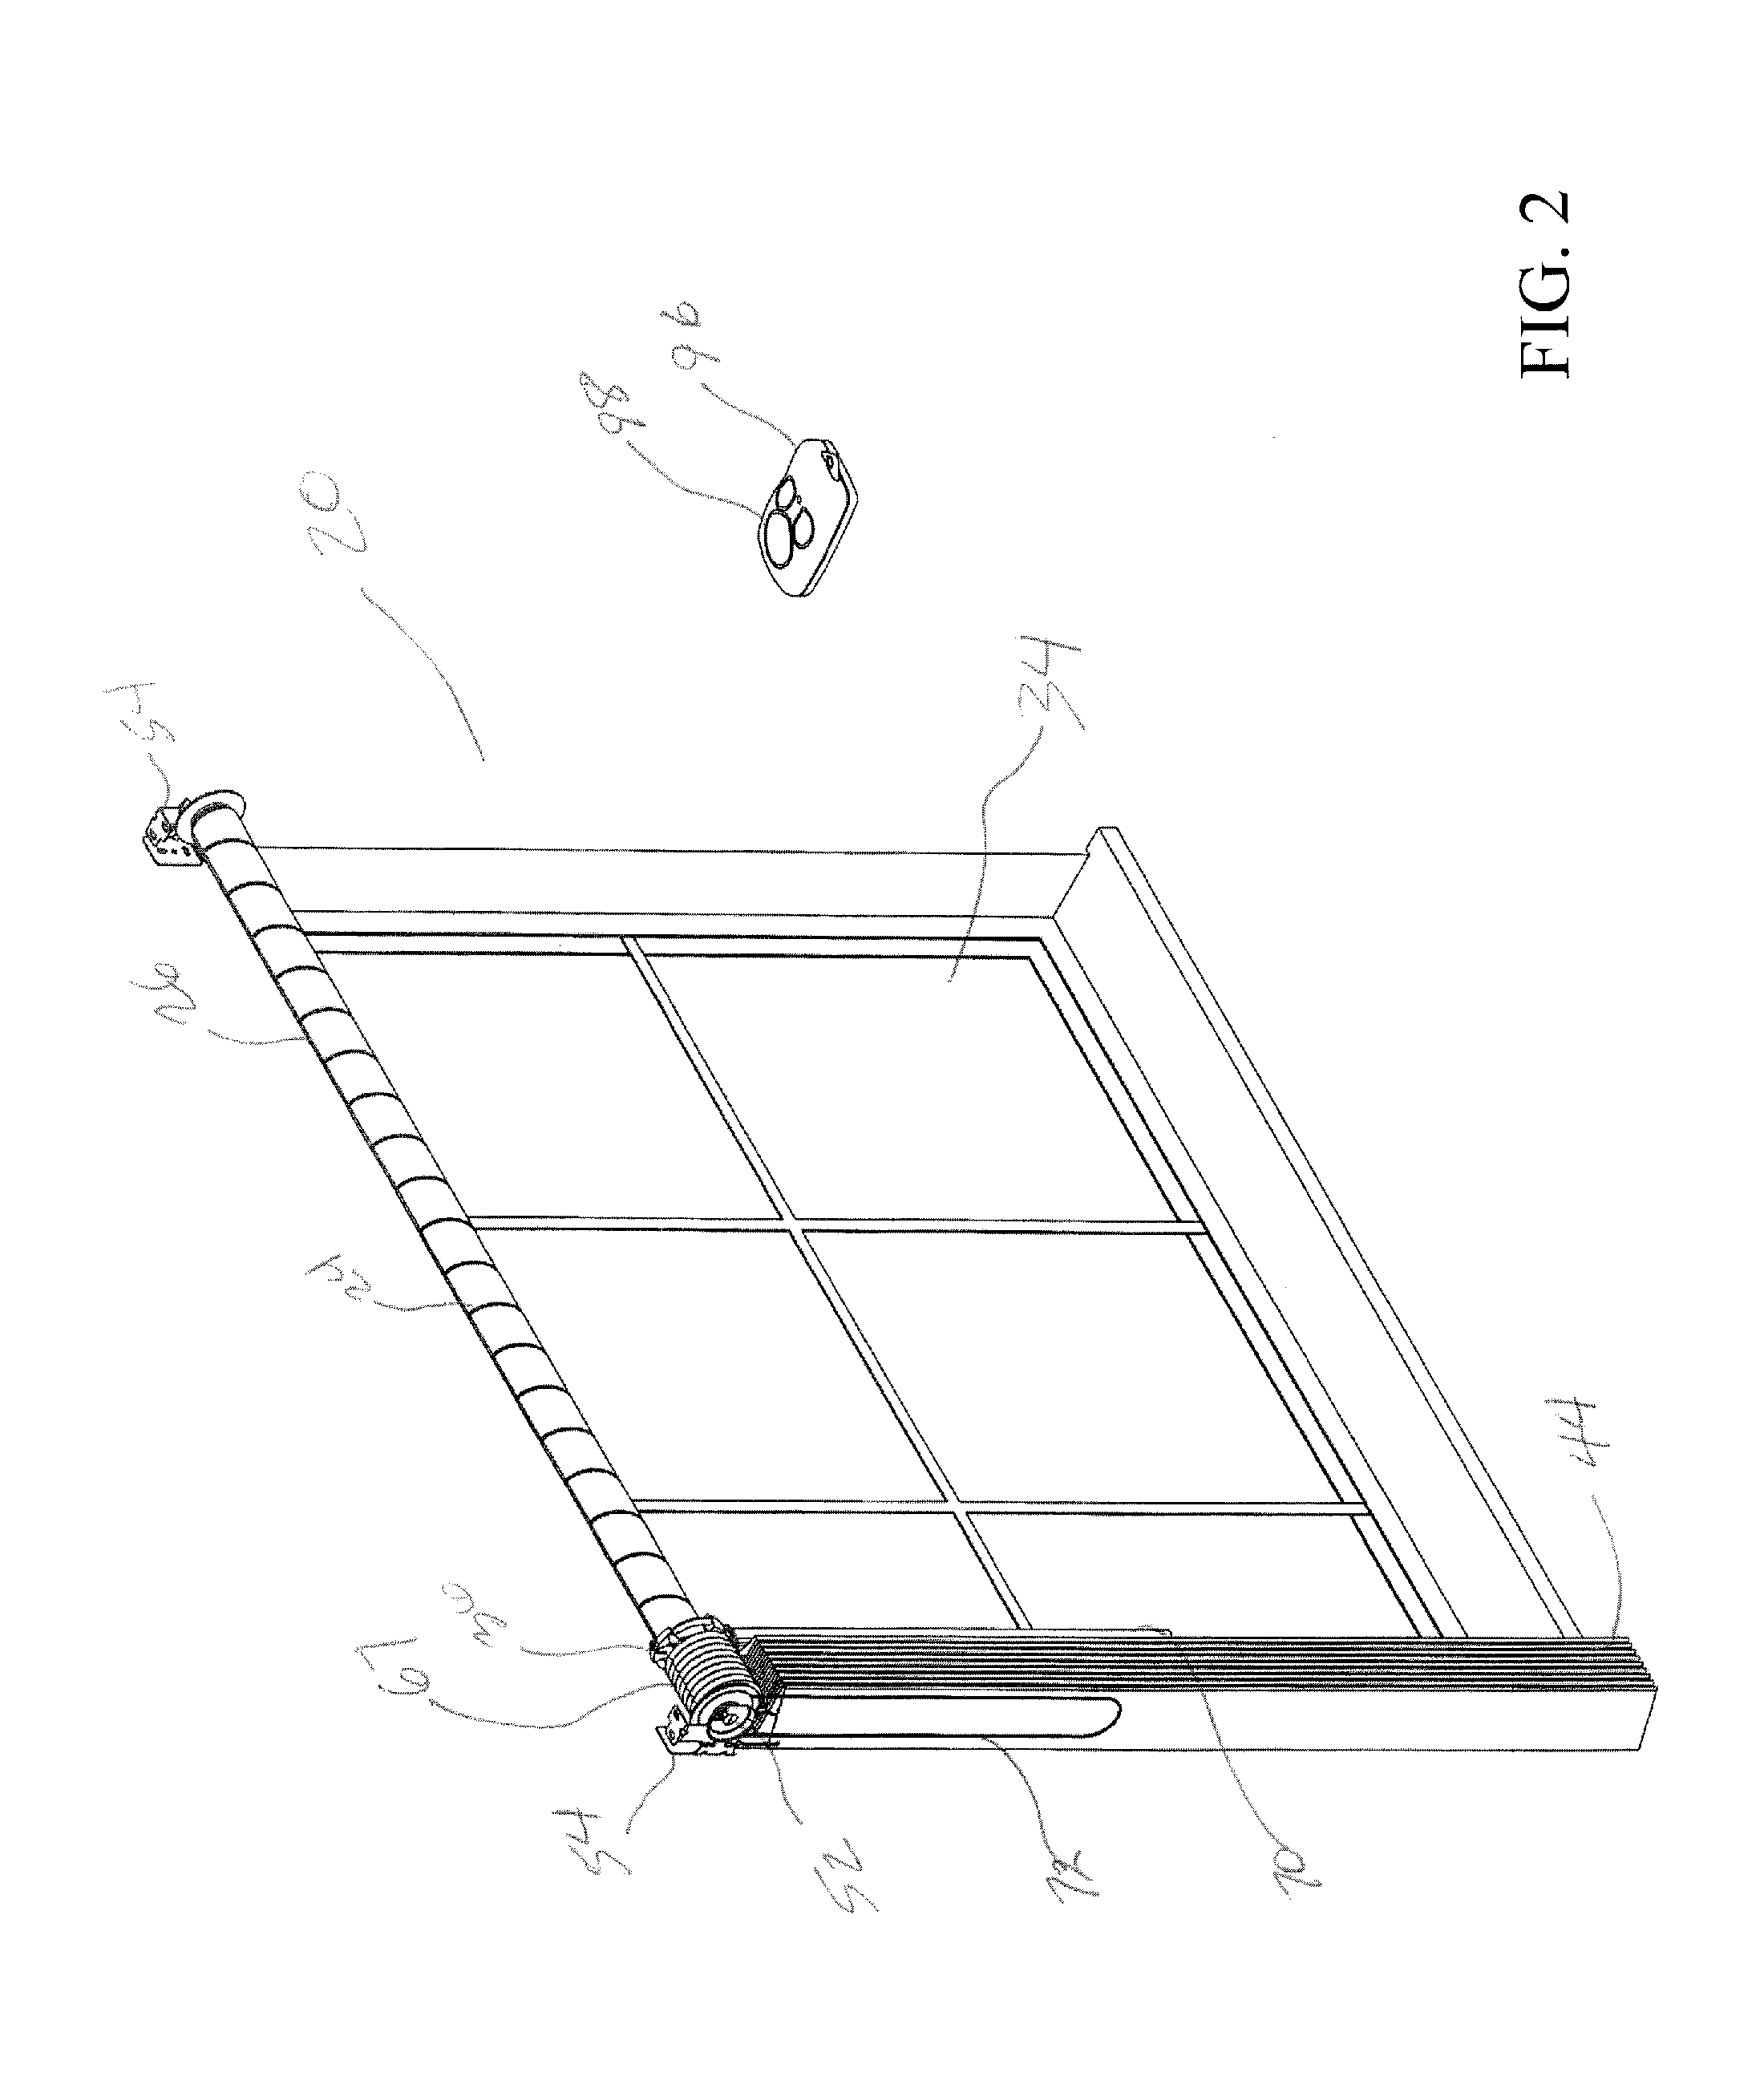 Method and apparatus for linked horizontal drapery panels having varying characteristics to be moved independently by a common drive system